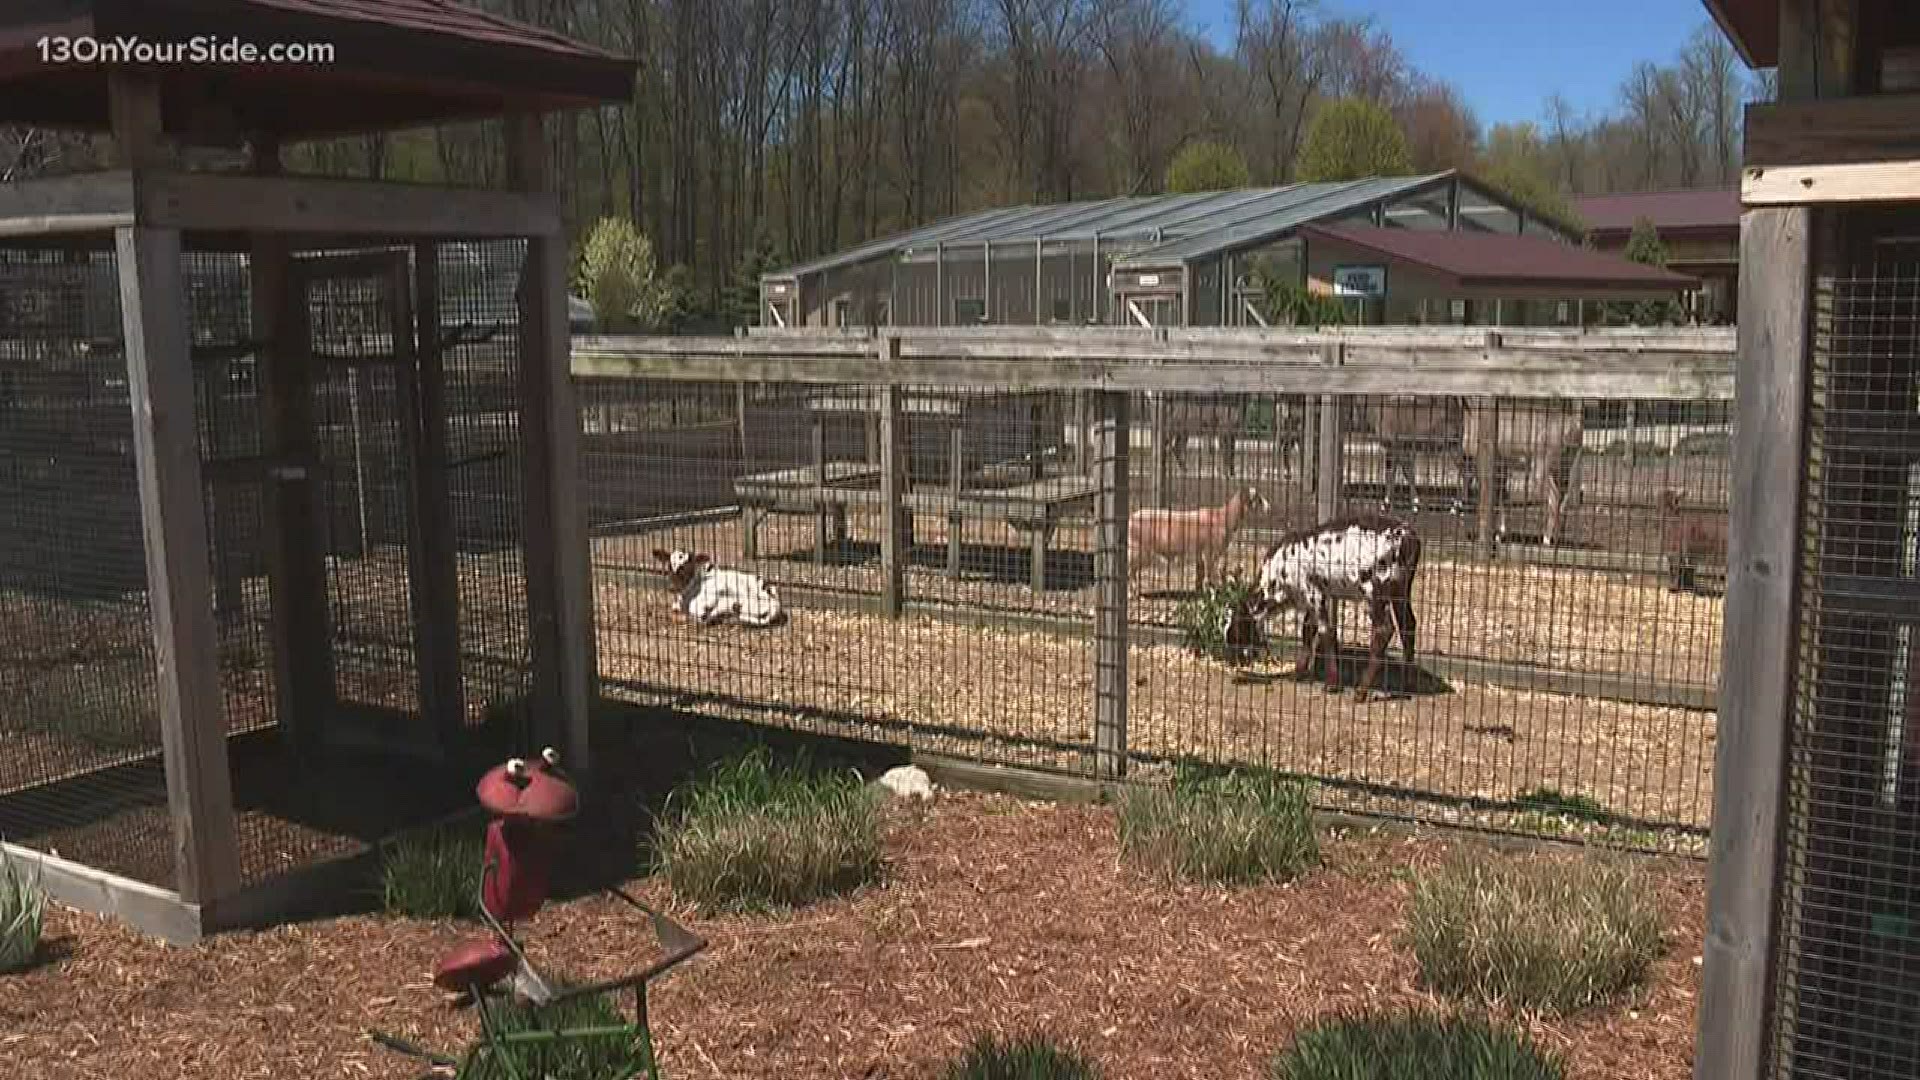 The privately owned animal park said it did not get official approval to open but are implementing social distancing practices.